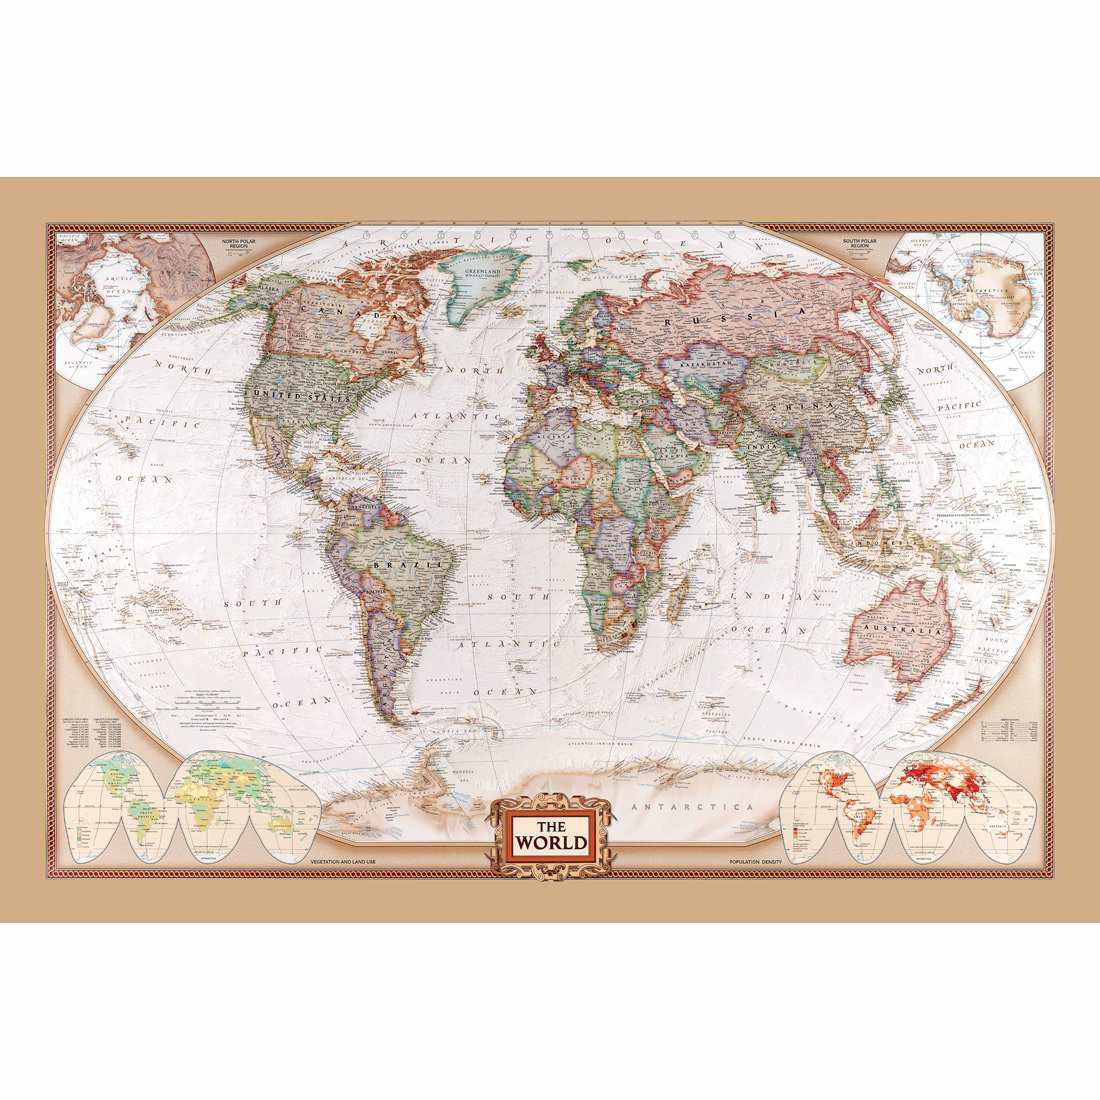 The World Map-Acrylic-Wall Art Design-With Border-Acrylic - No Frame-45x30cm-Wall Art Designs